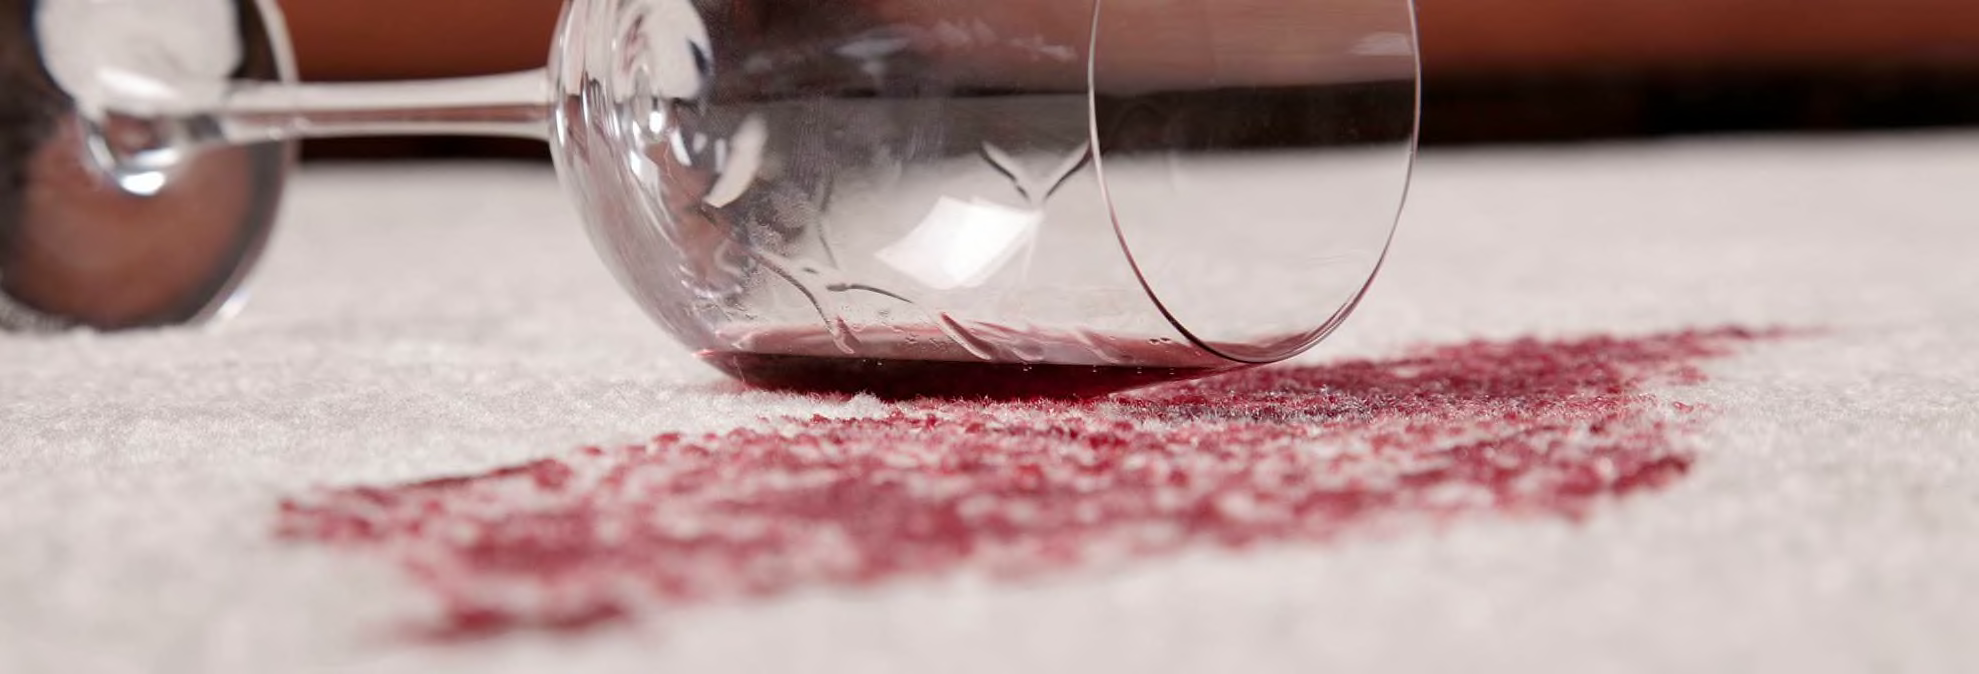 Carpet Stain Remover Buying Guide